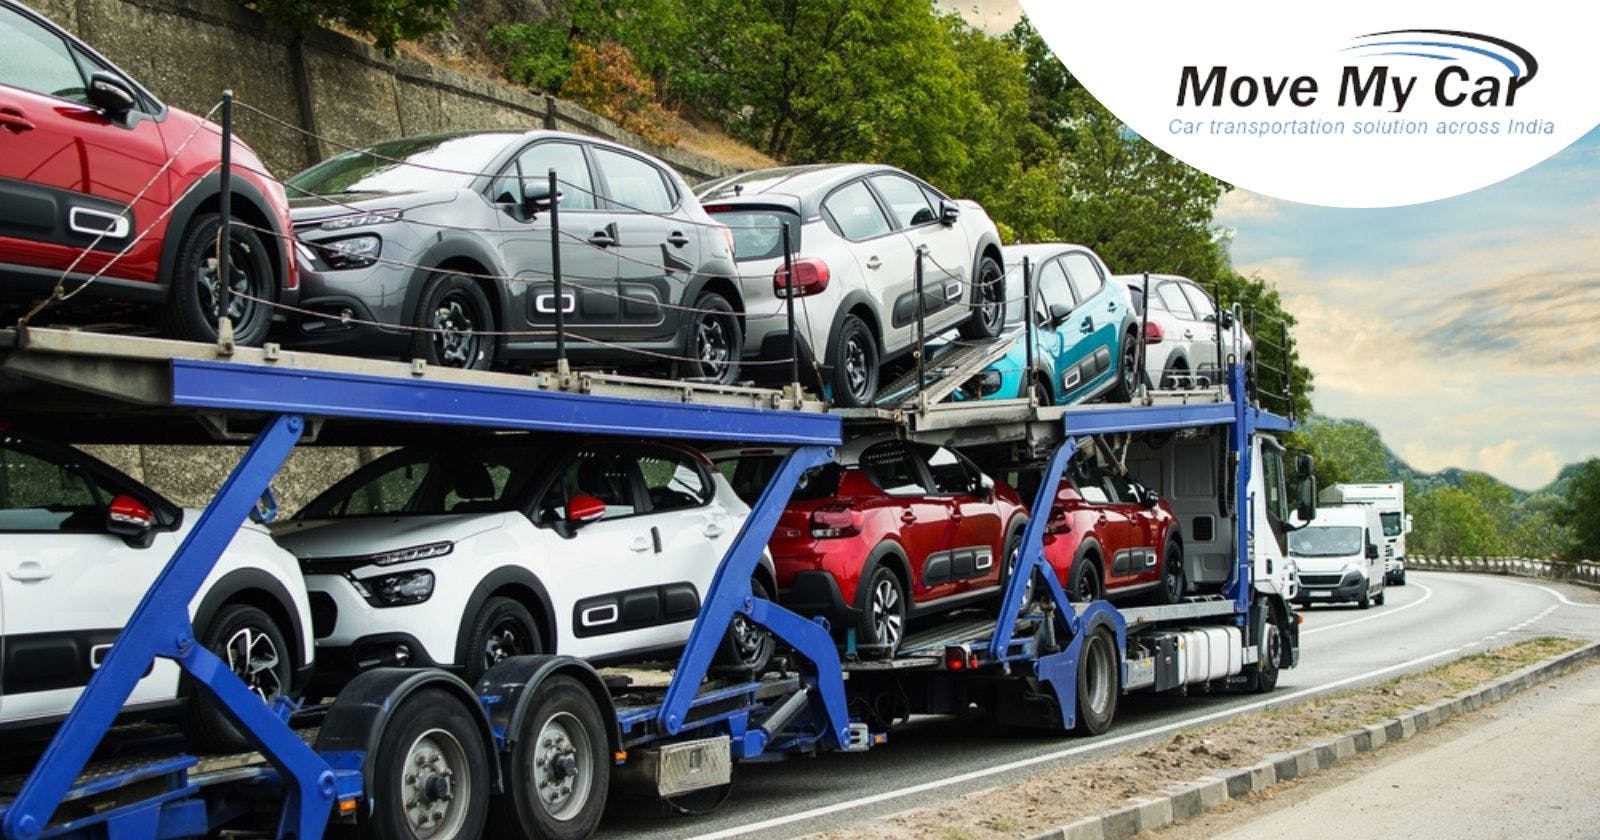 How far in advance should customers book a car shipping service?